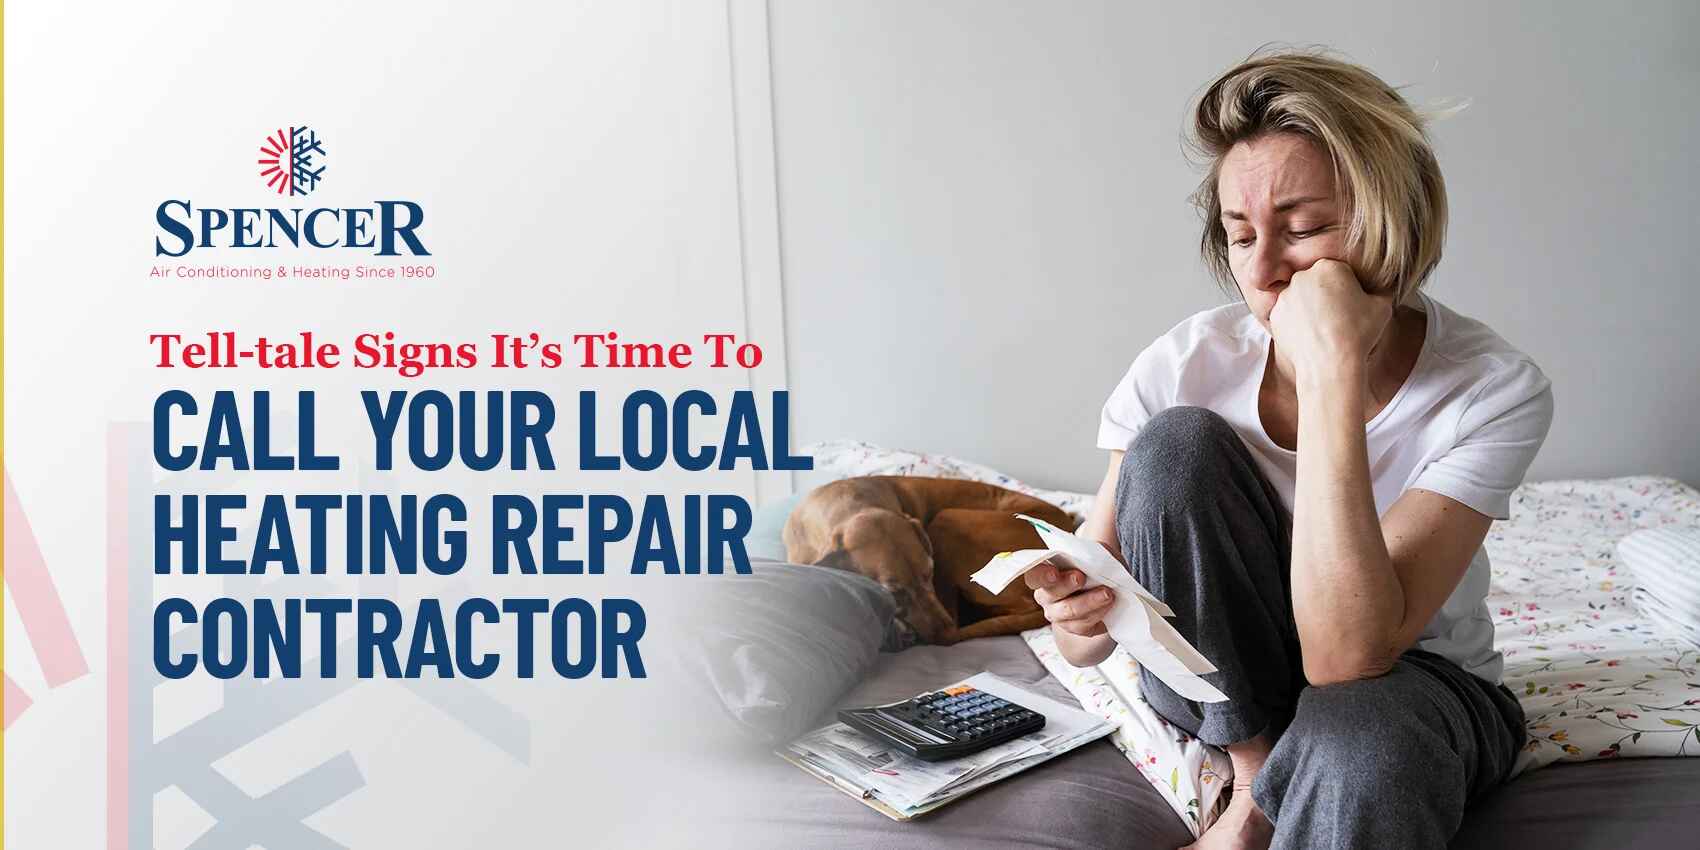 spencer tell tale signs it's time to call your local heating repair contractor blog post title